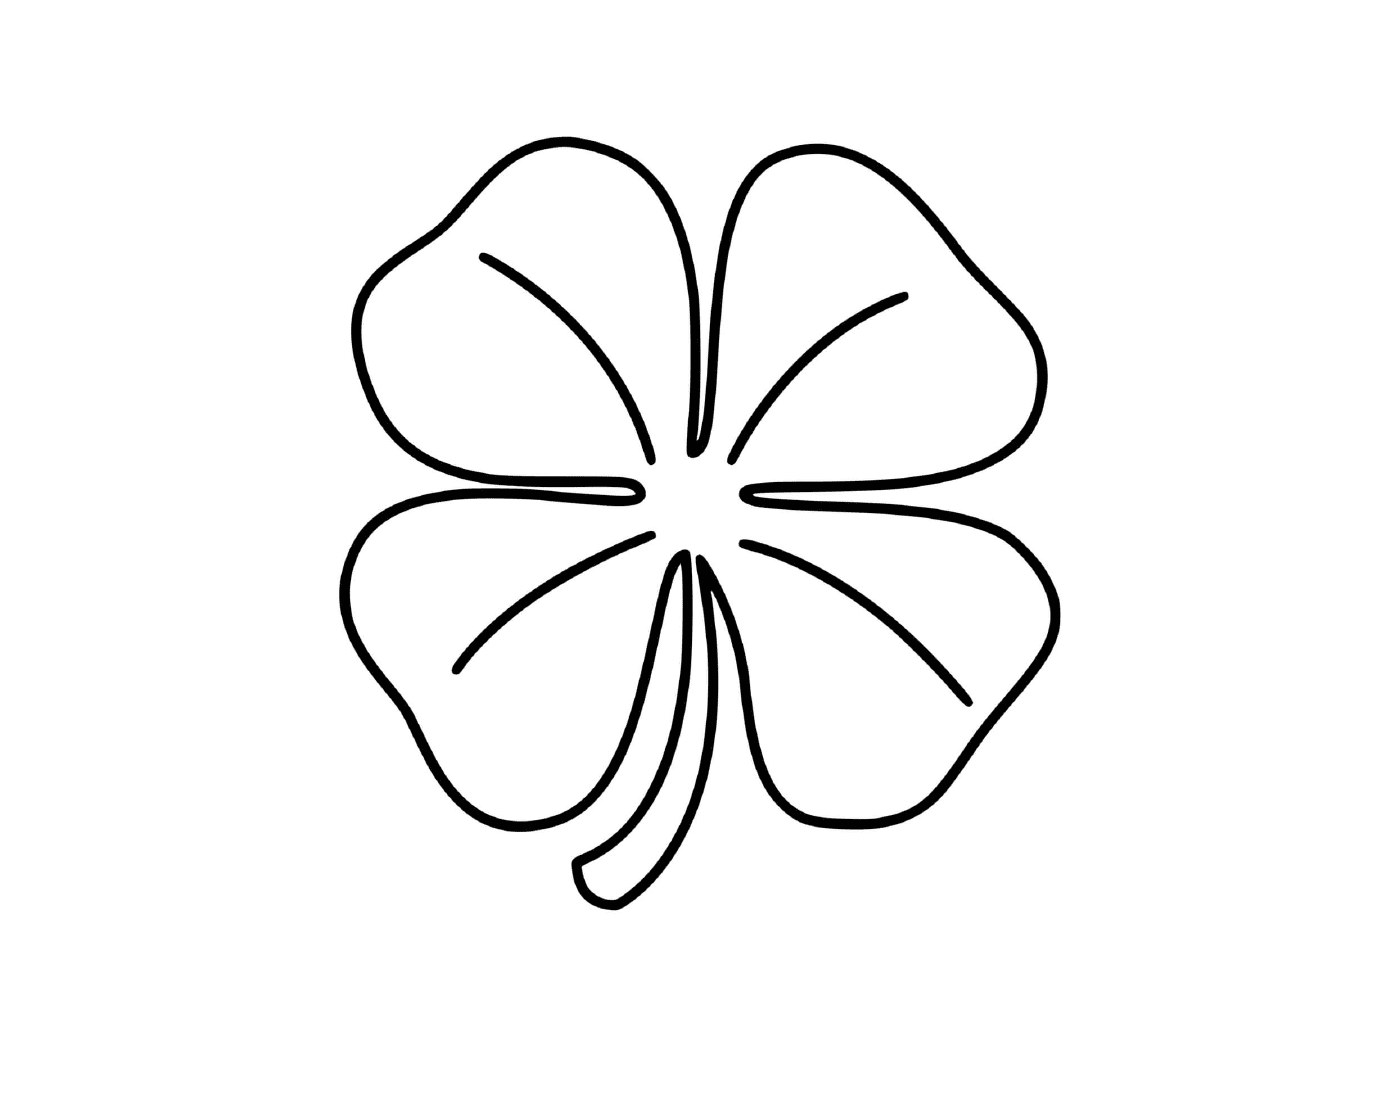  Four leaves of lucky clover 